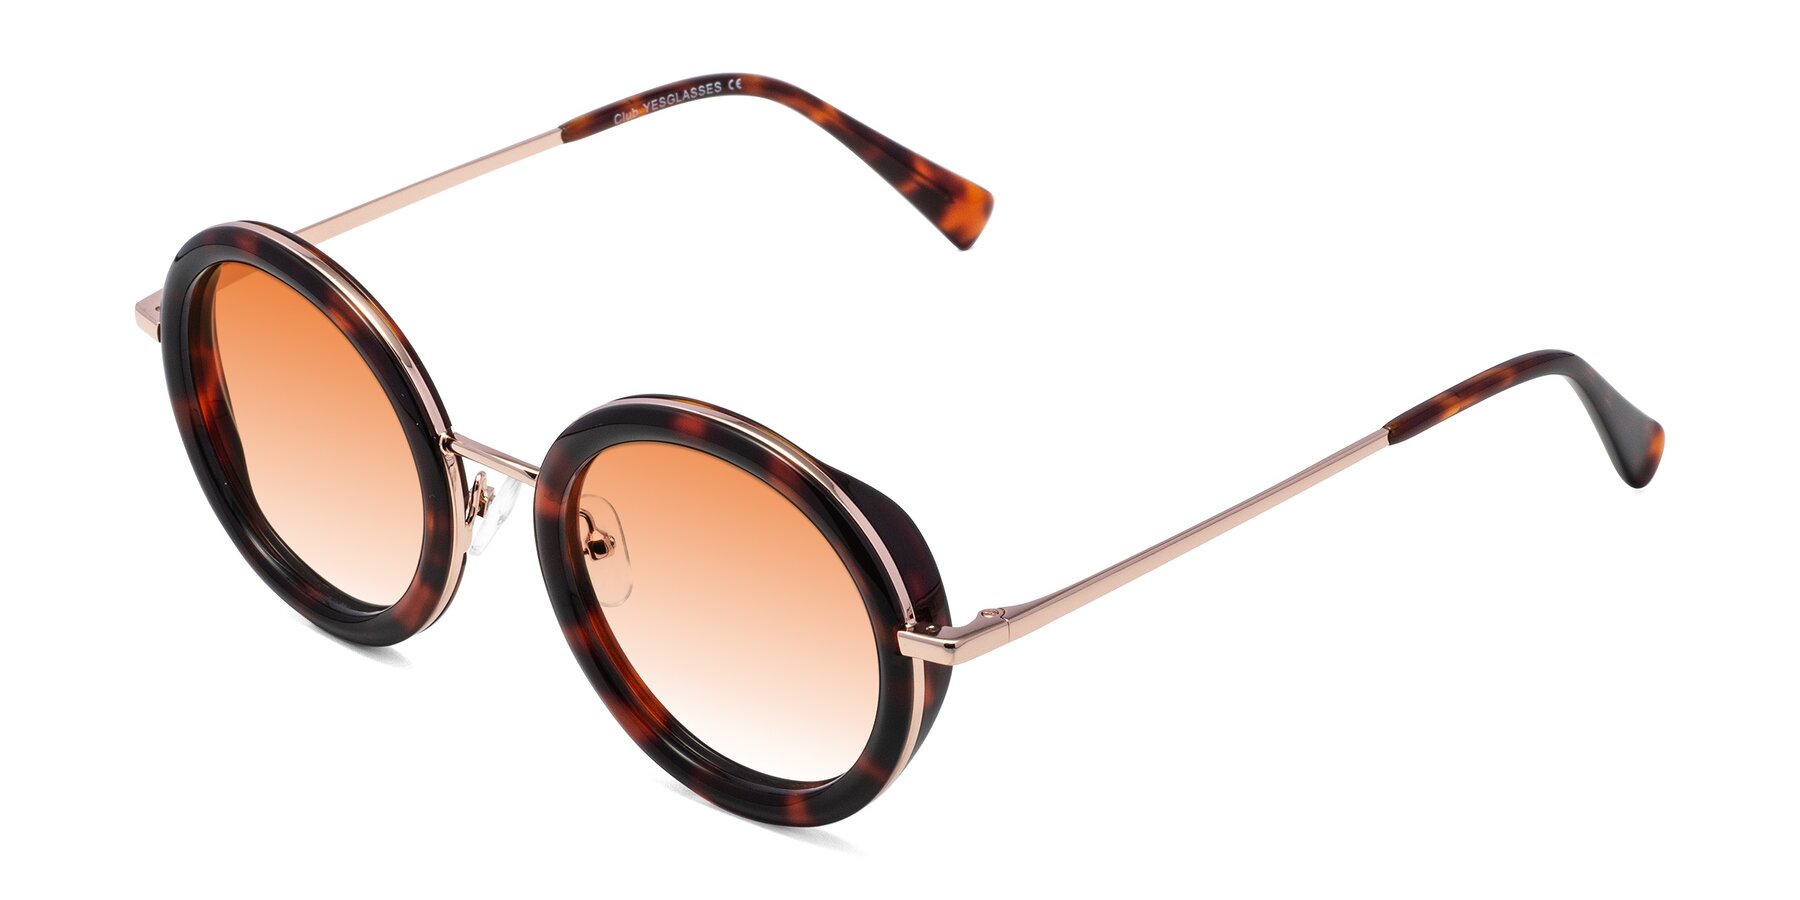 Angle of Club in Tortoise-Rose Gold with Orange Gradient Lenses